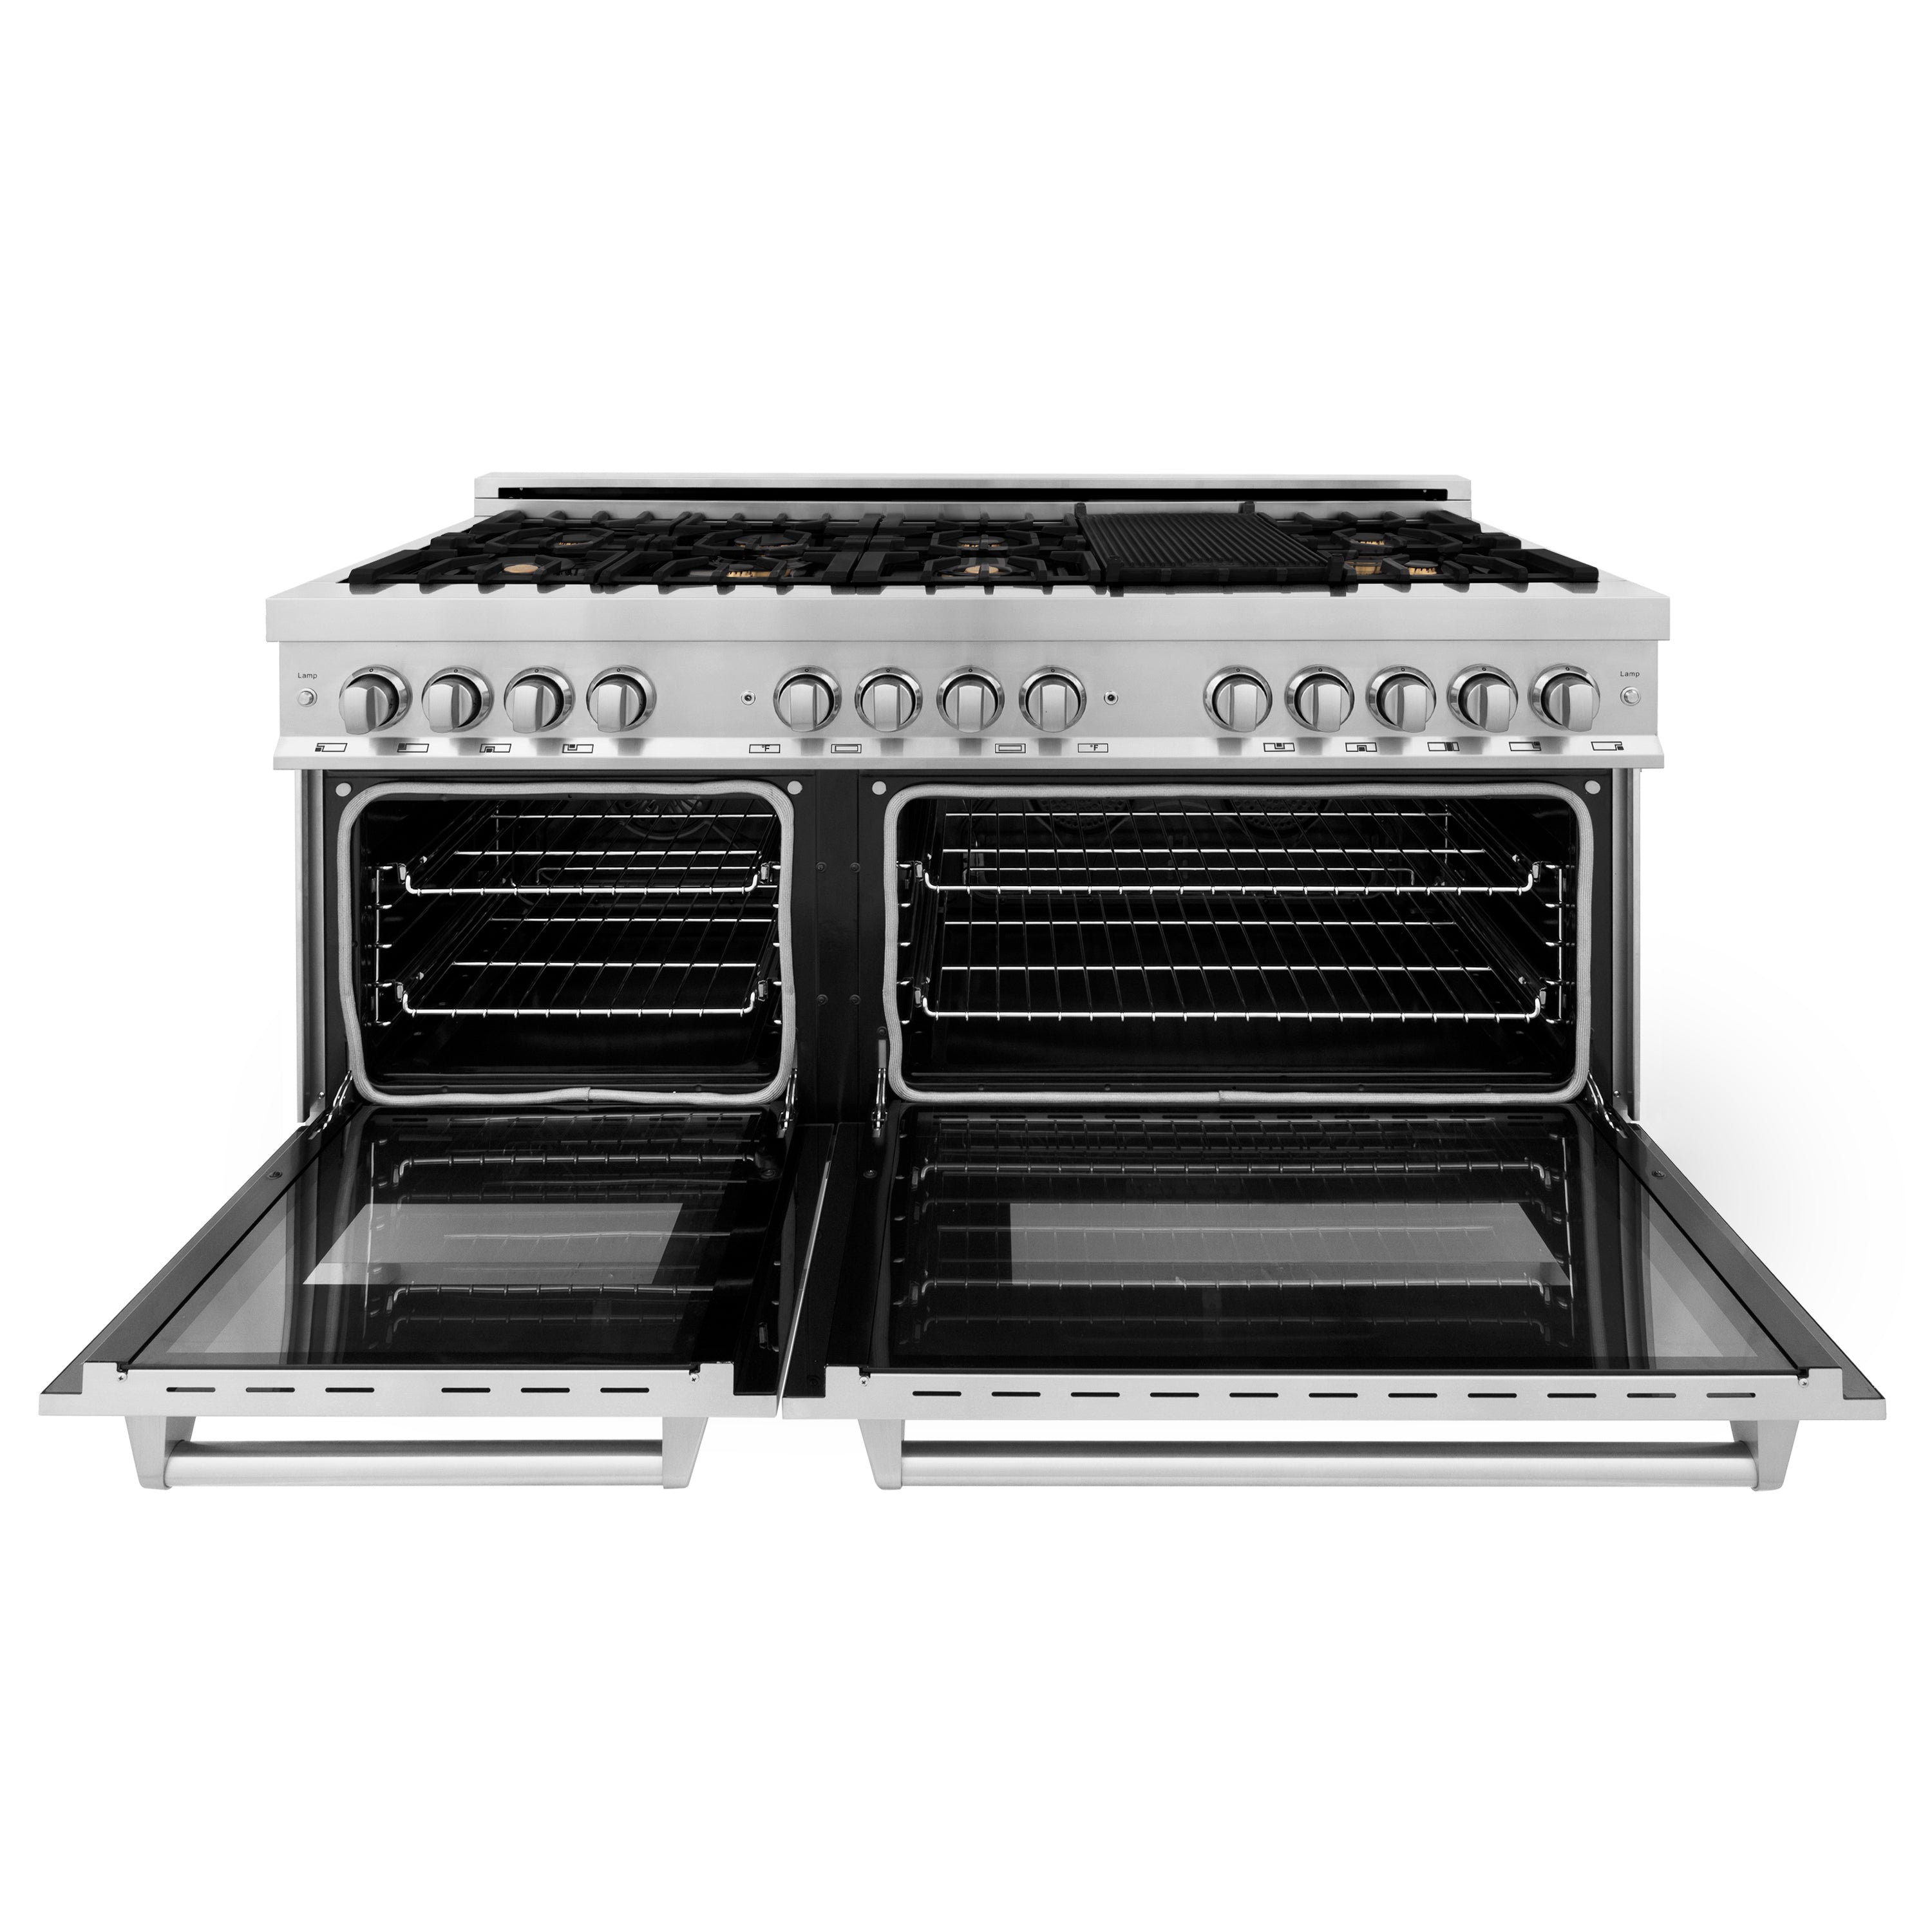 ZLINE 60" 7.4 cu. ft. Dual Fuel Range with Gas Stove and Electric Oven in Stainless Steel with Brass Burners (RA-BR-60)